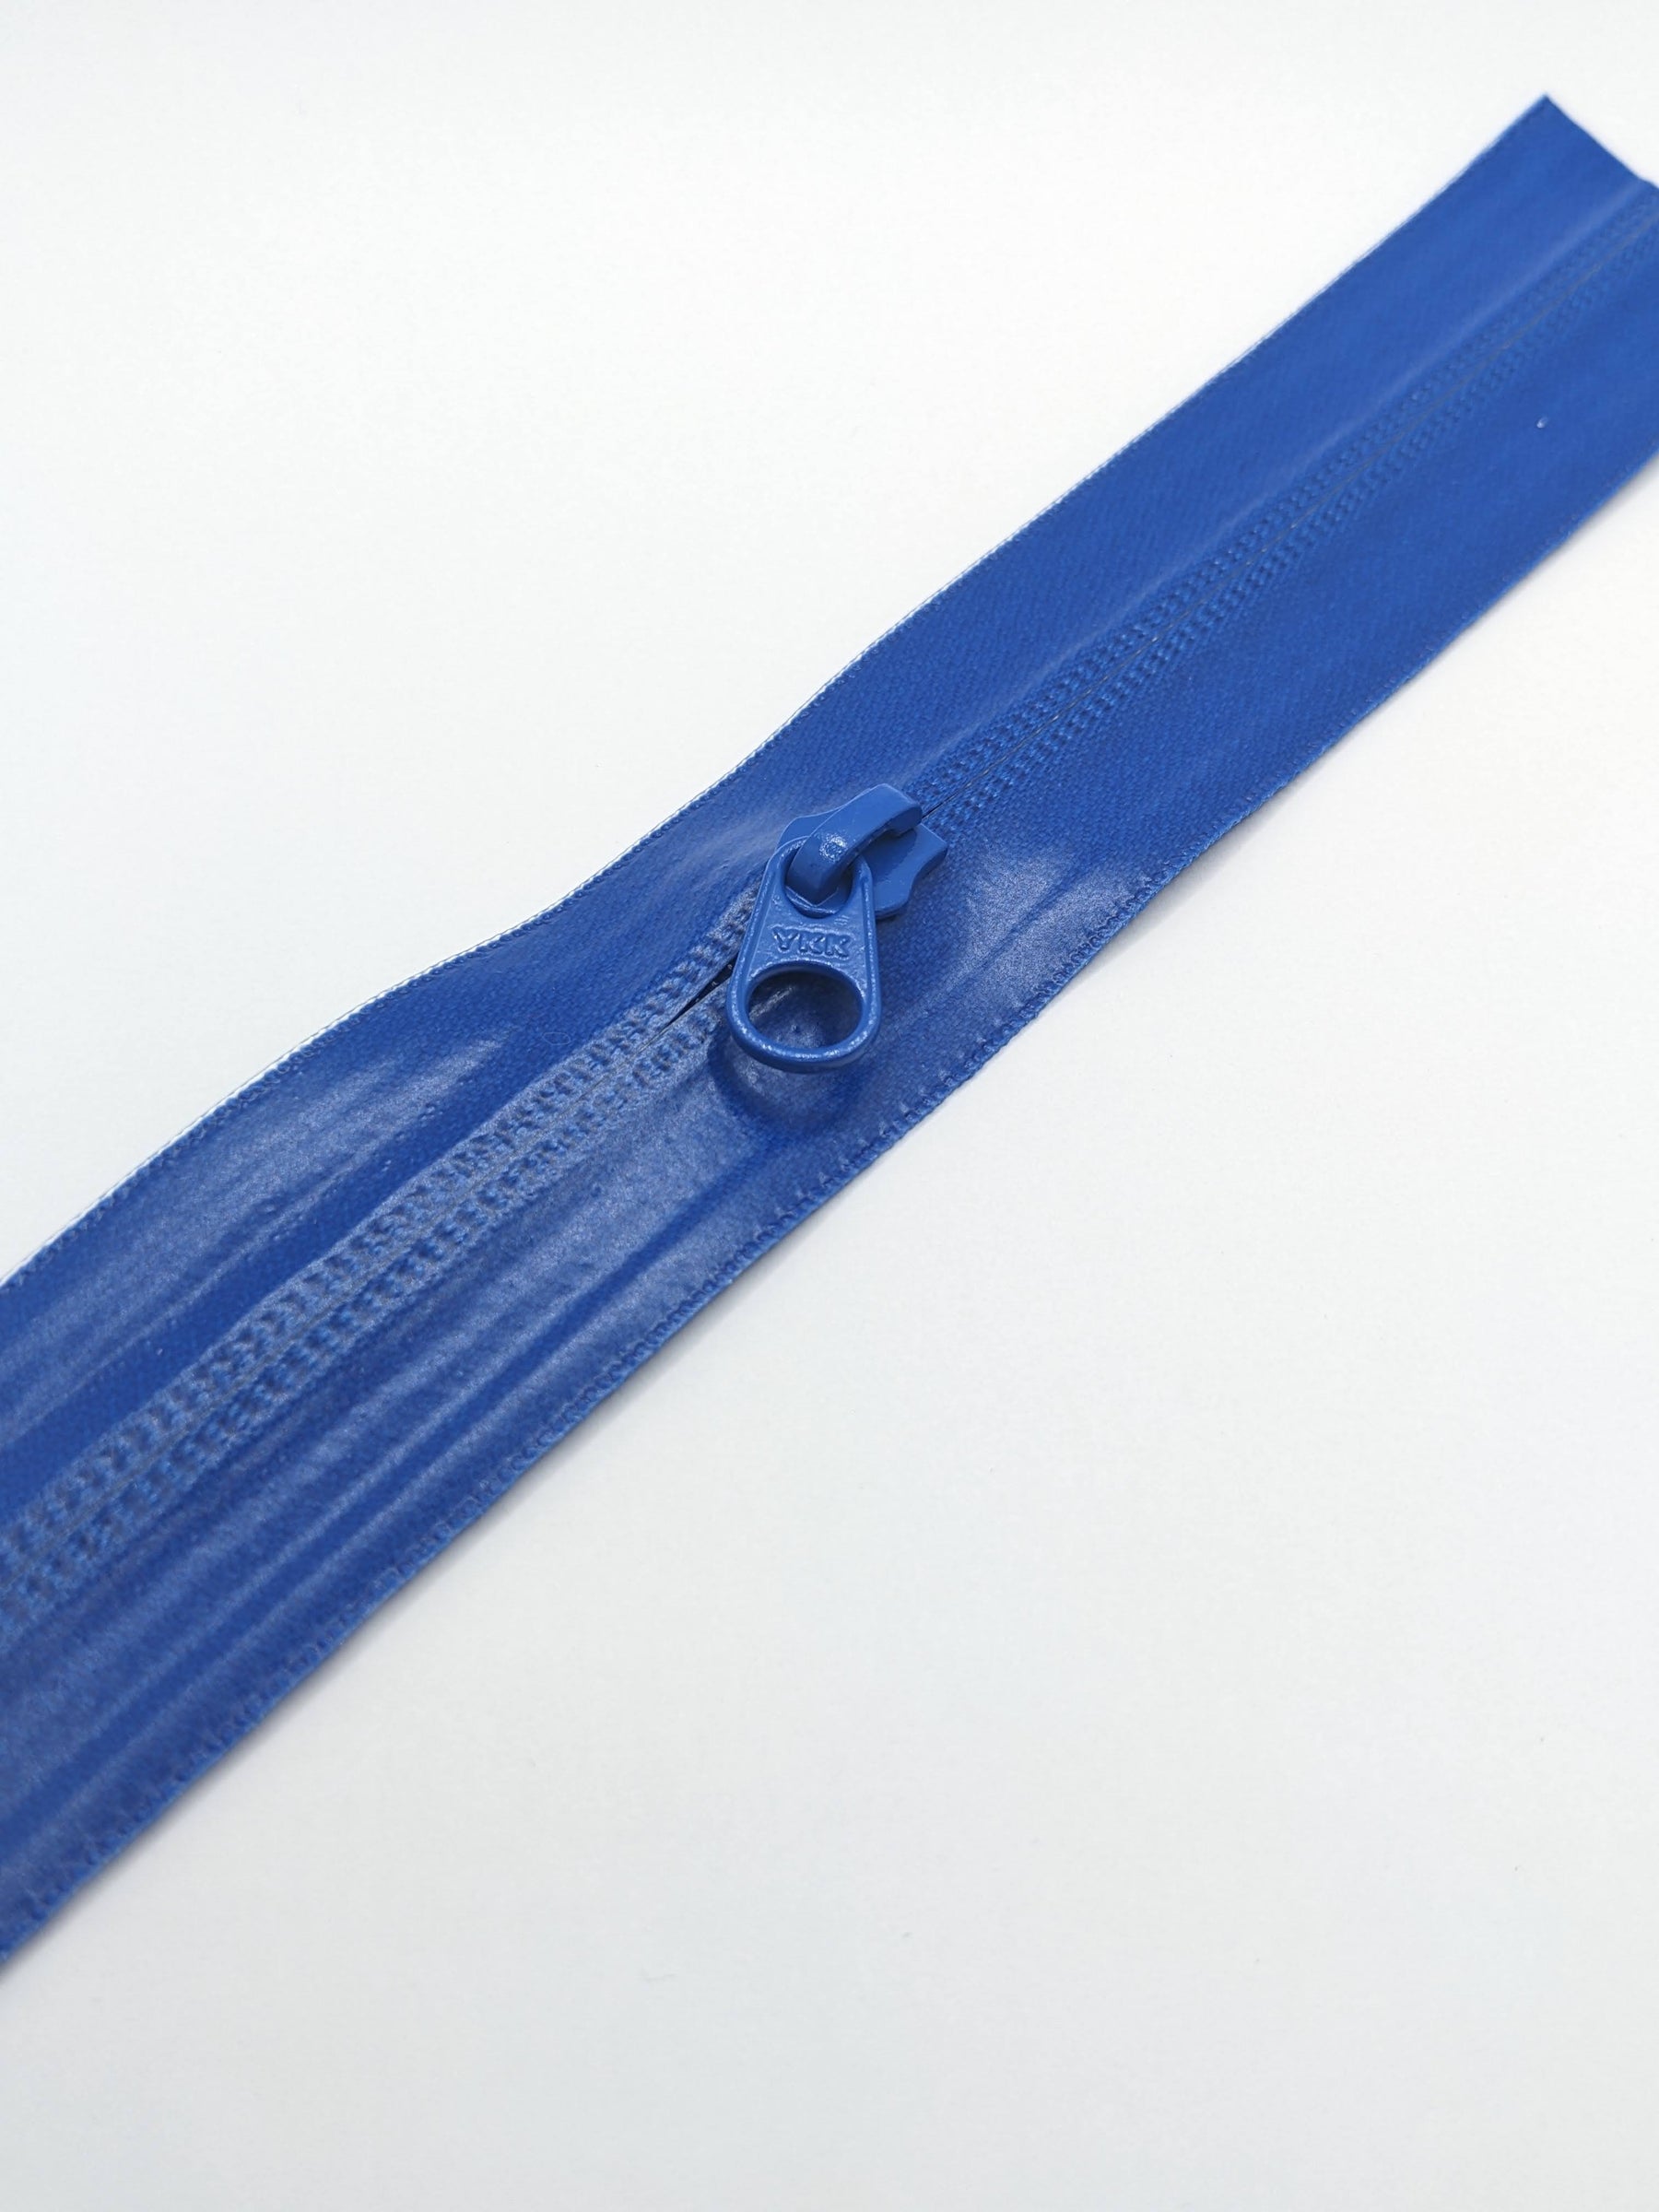 YKK's AquaGuard® NATULON® series is an eco-friendly water-repellent zipper option created by laminating polyurethane (PU) on the non-coil, reverse side of a zipper. The NATULON style is the new sustainable standard for all YKK Aquaguard products.   YKK's AquaGuard® NATULON® updates include:  Recycled polyester tape (which helps reduce CHG emissions) PFC free water repellant finish 20-40% smoother in operation force New smoother appearance